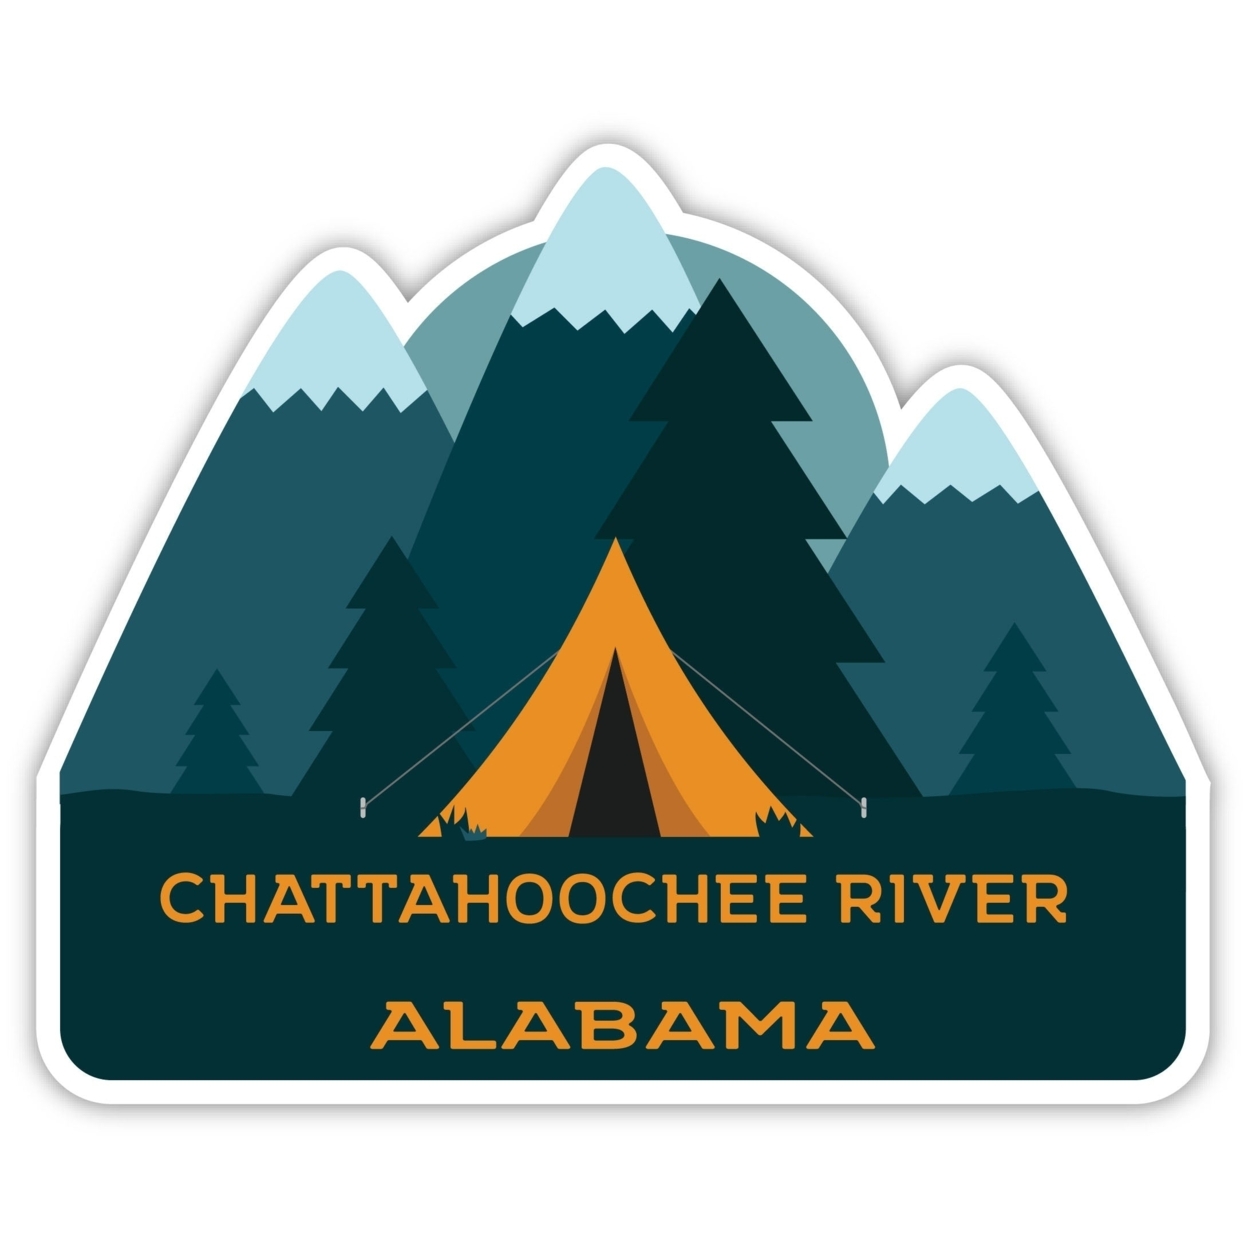 Chattahoochee River Alabama Souvenir Decorative Stickers (Choose Theme And Size) - 4-Pack, 6-Inch, Tent